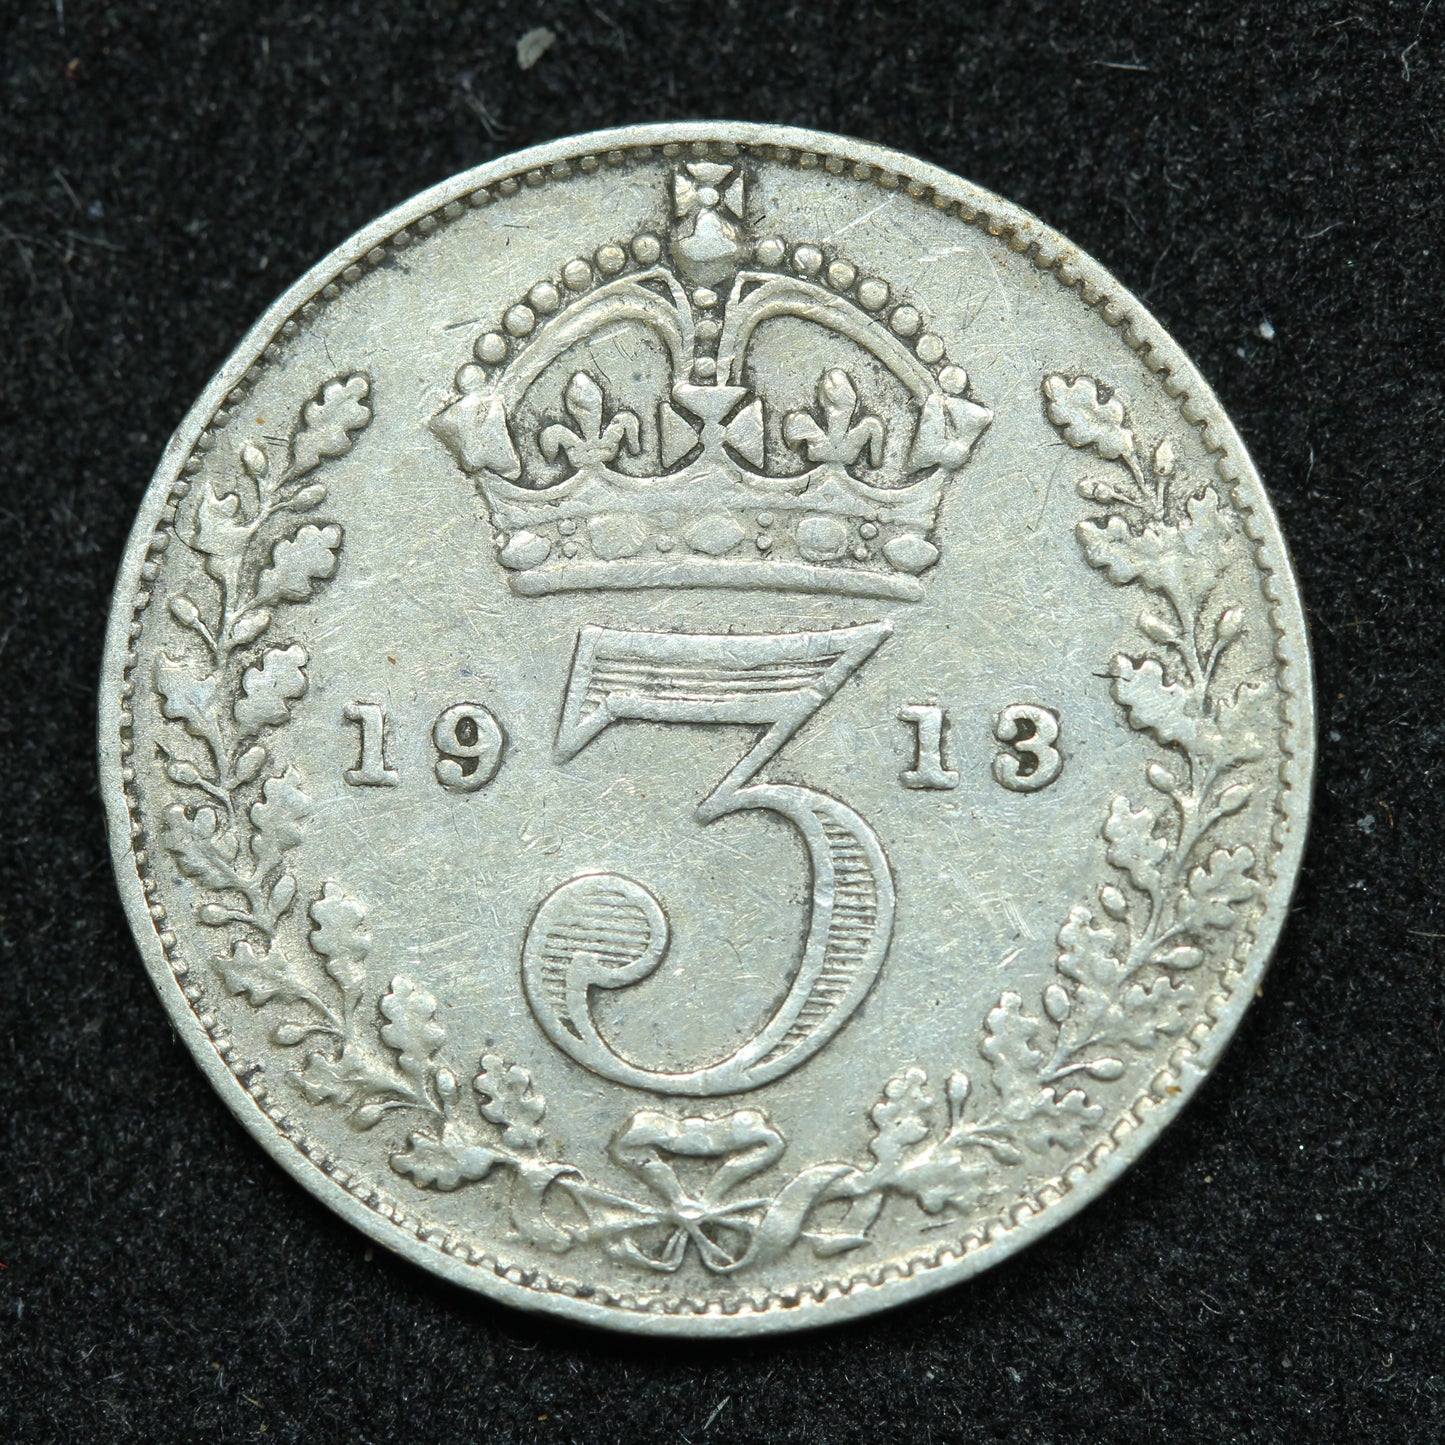 1913 Great Britain 3 Pence Threepence Silver Coin - KM# 813